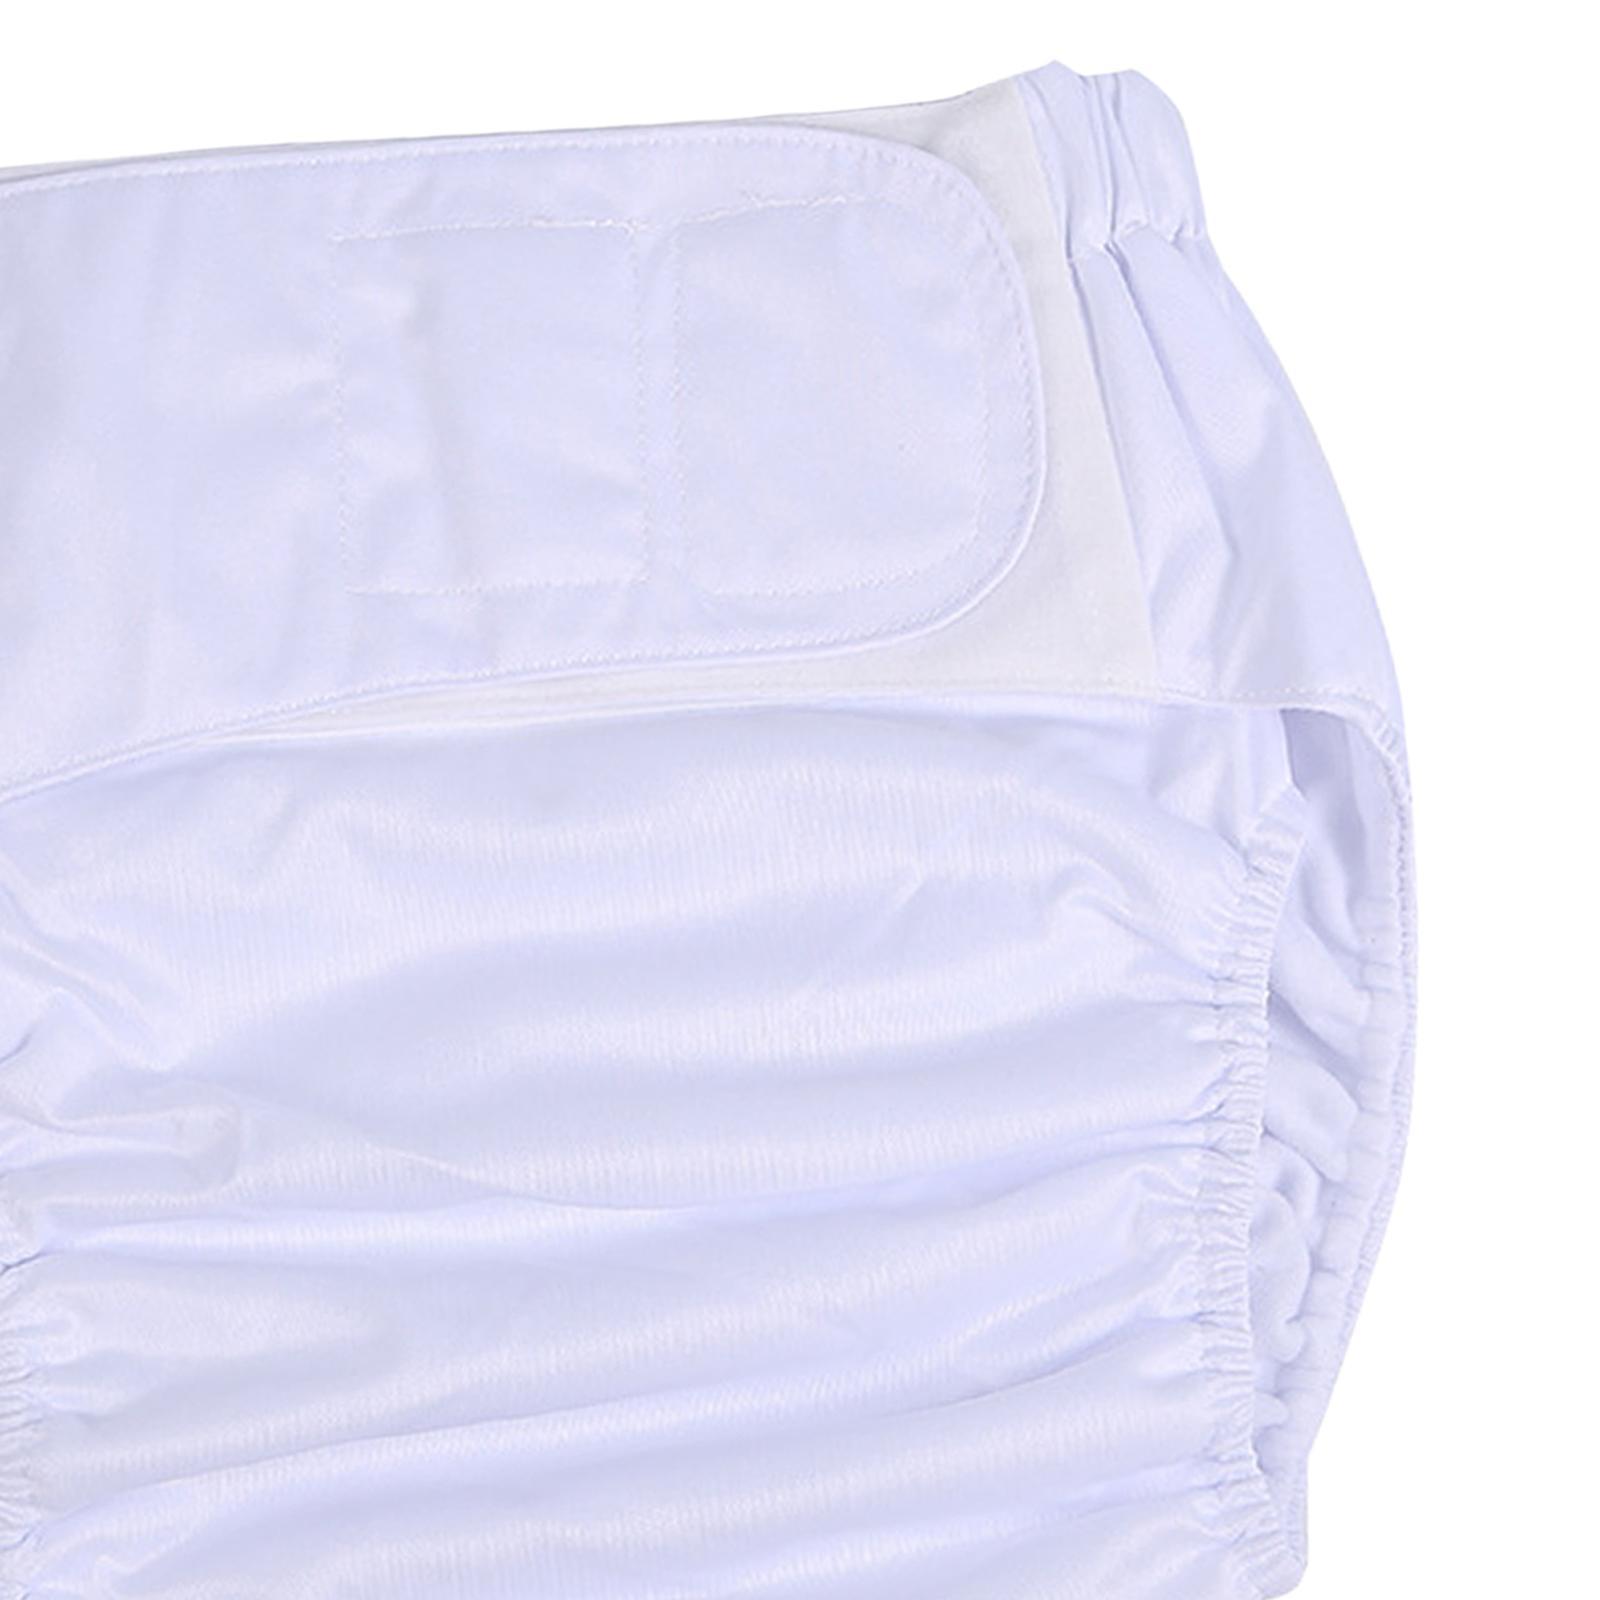 Adult Diaper Nappy  Breathable Fitted Reusable for Men Women